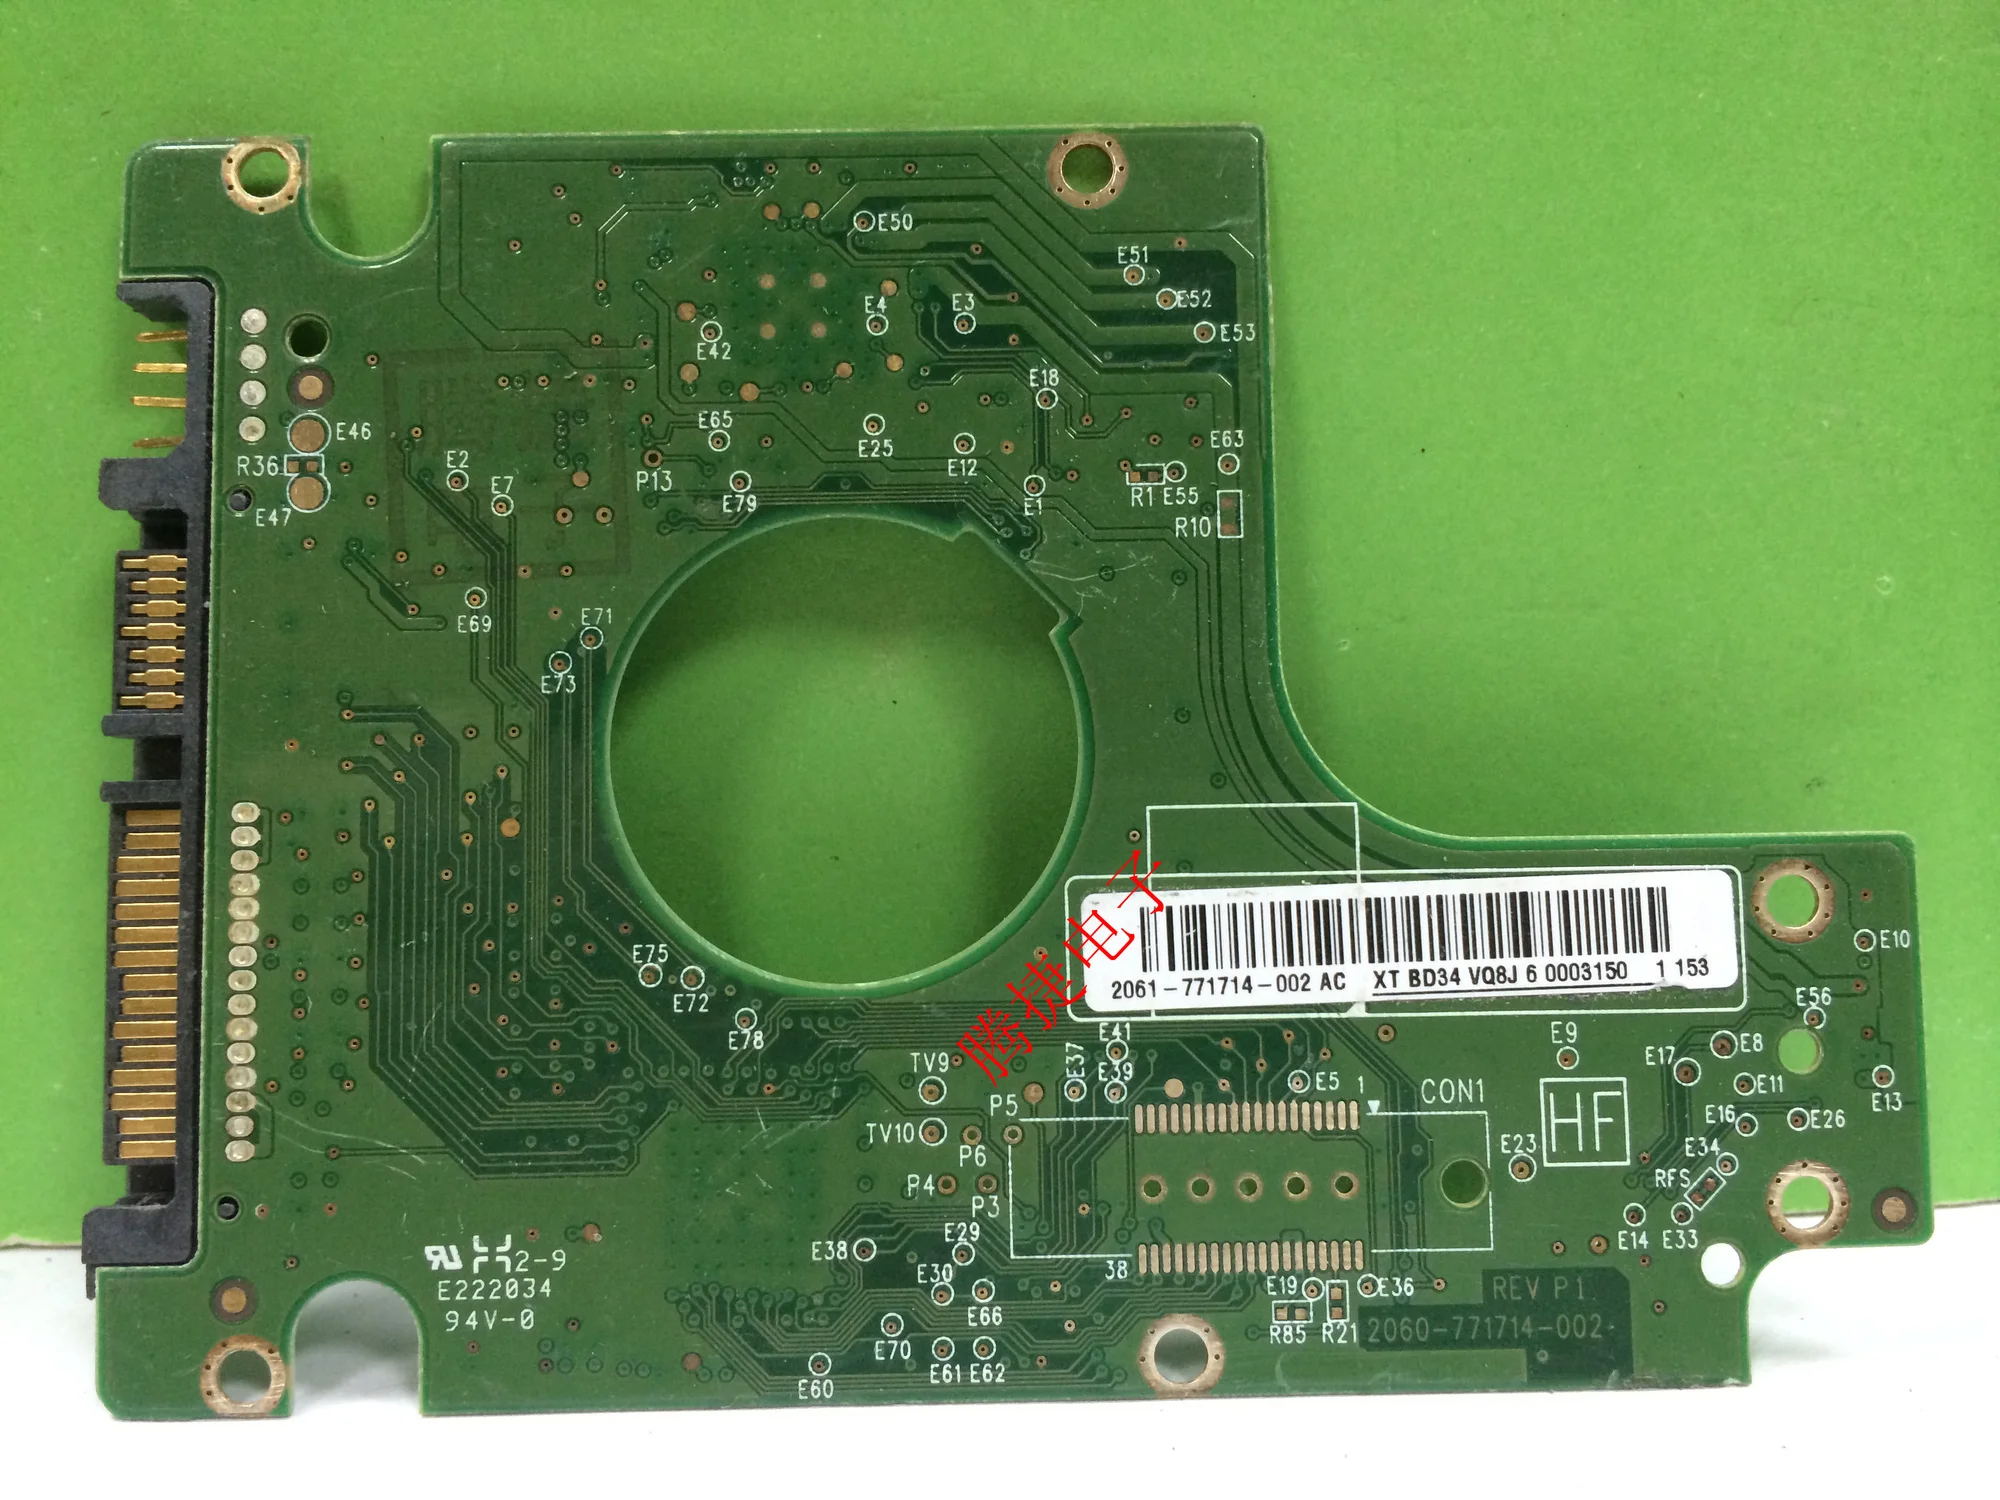 

2060-771714-002 REV P1 HDD PCB Notebook hard disk circuit board WD3200BVVT-00SCST0 2060-771714-002